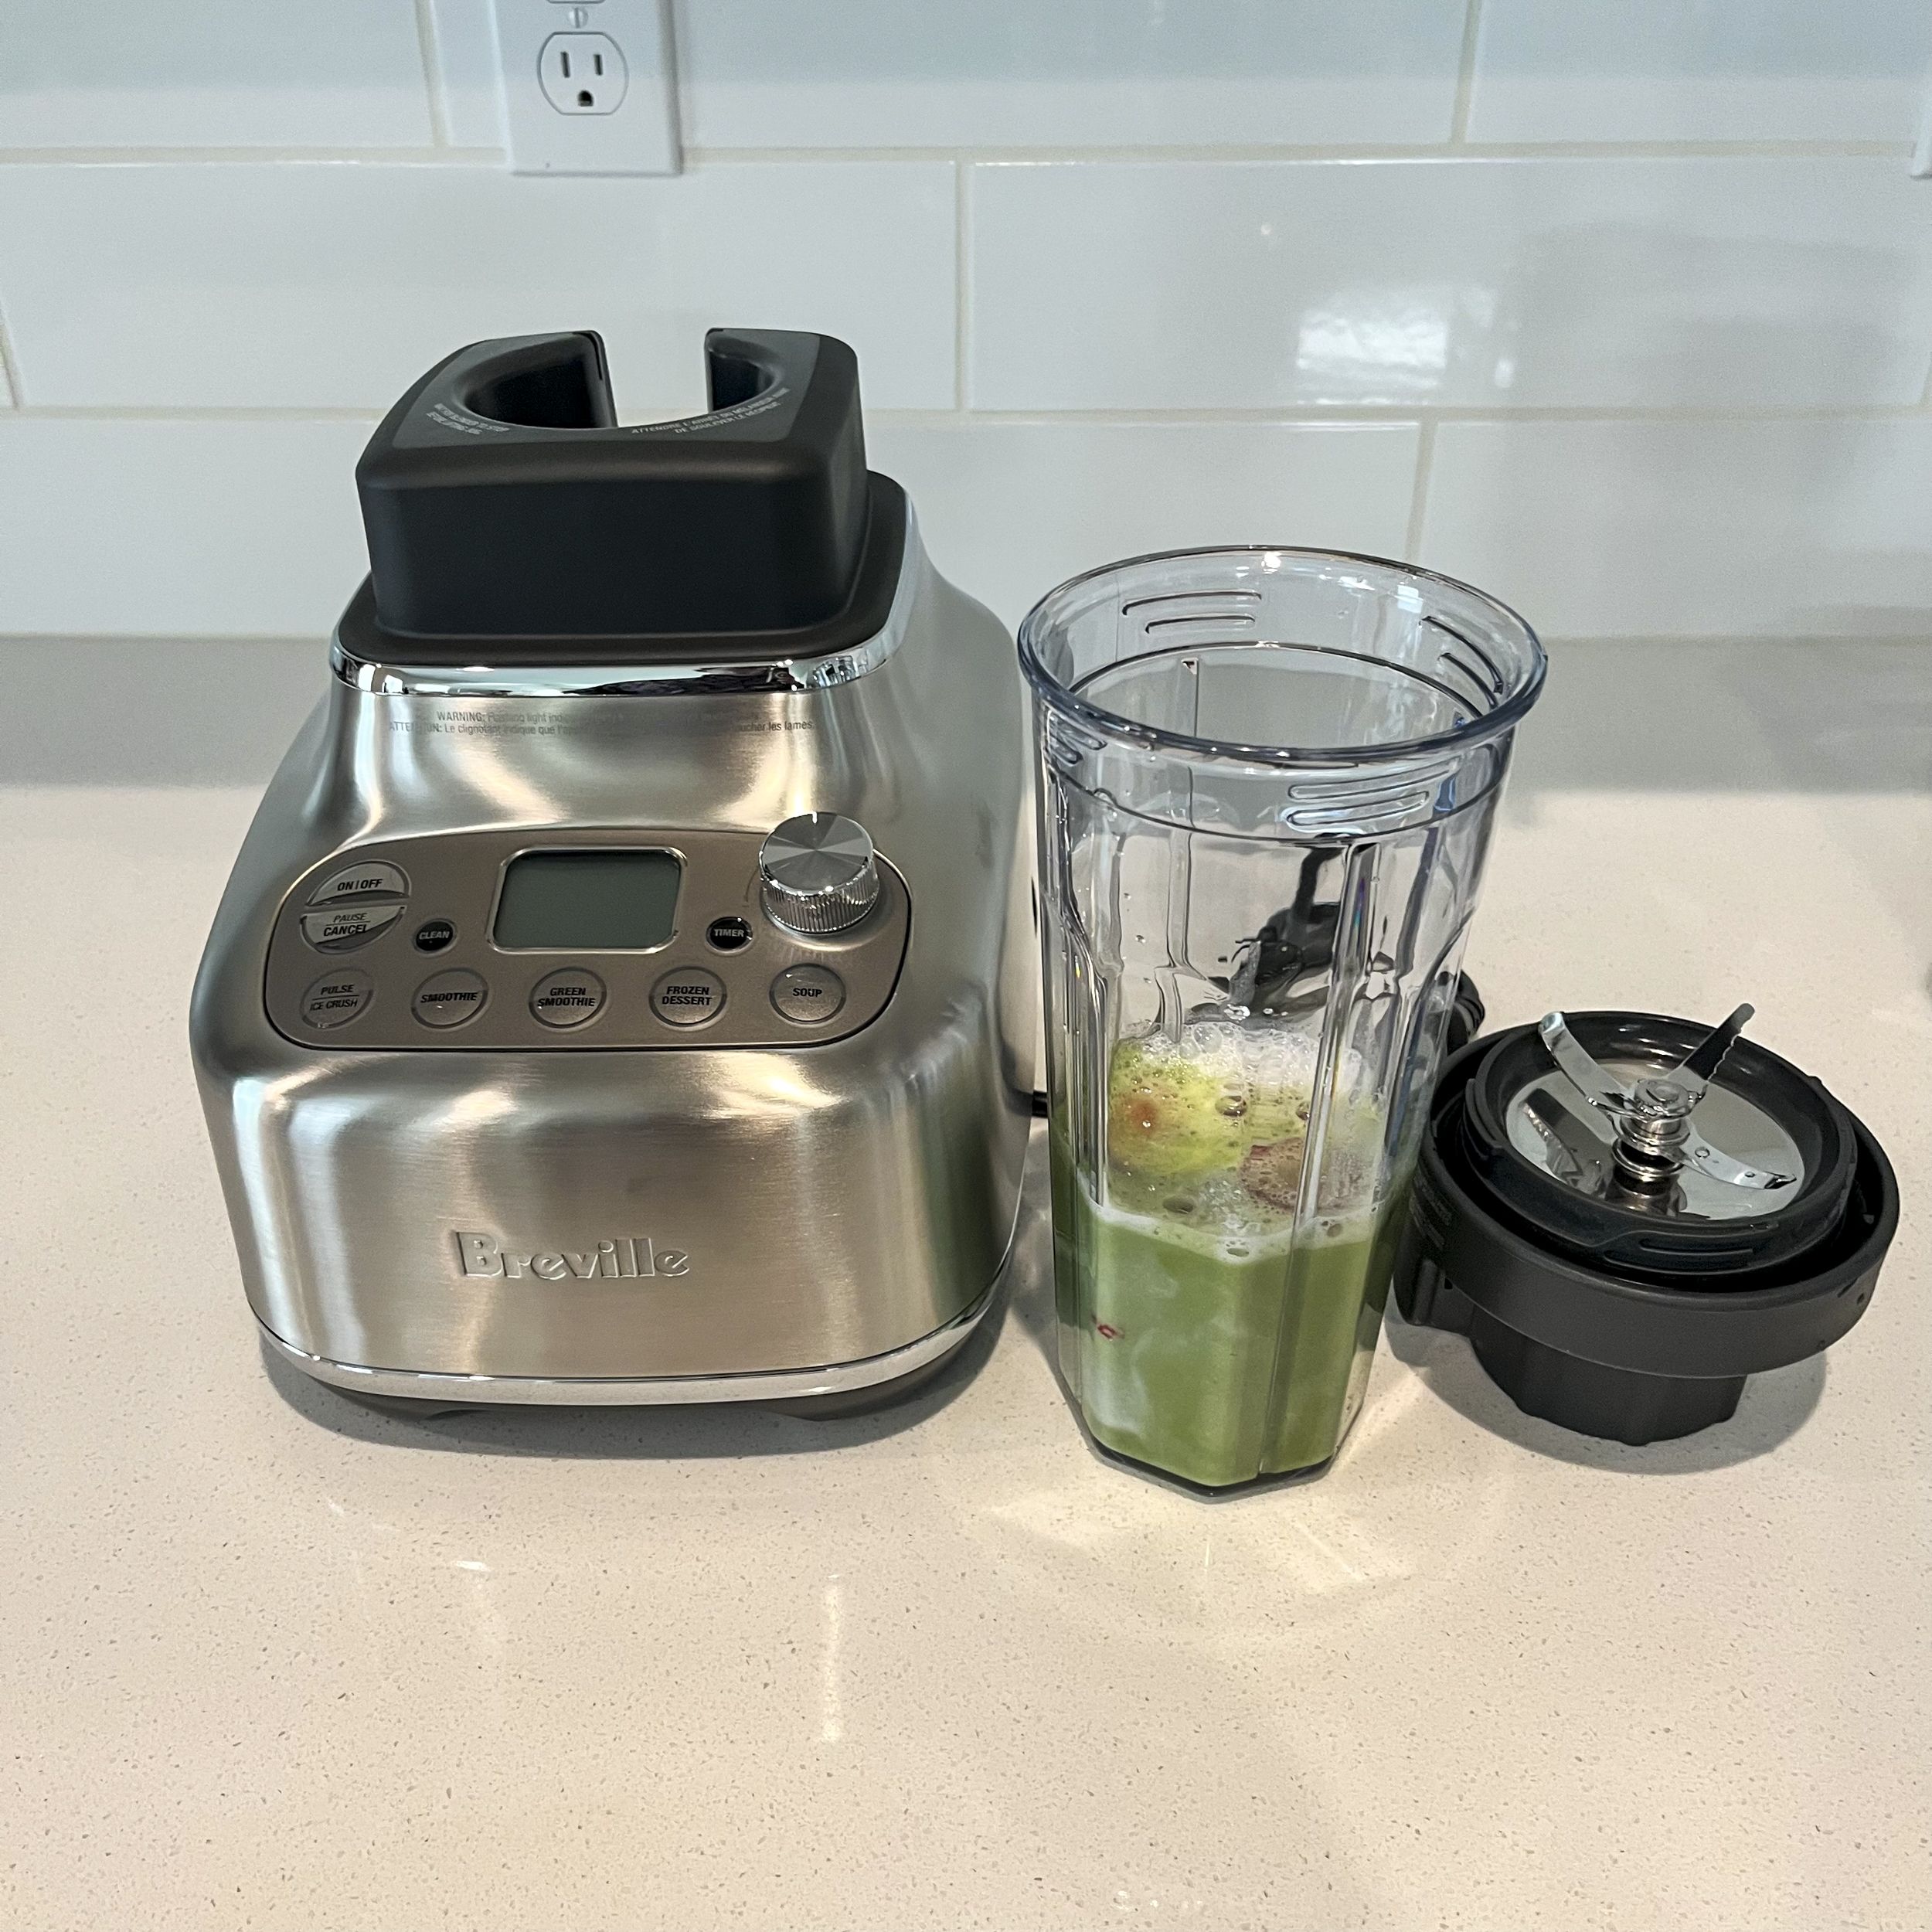 Power Blender Revolution : More Than 300 Healthy and Amazing